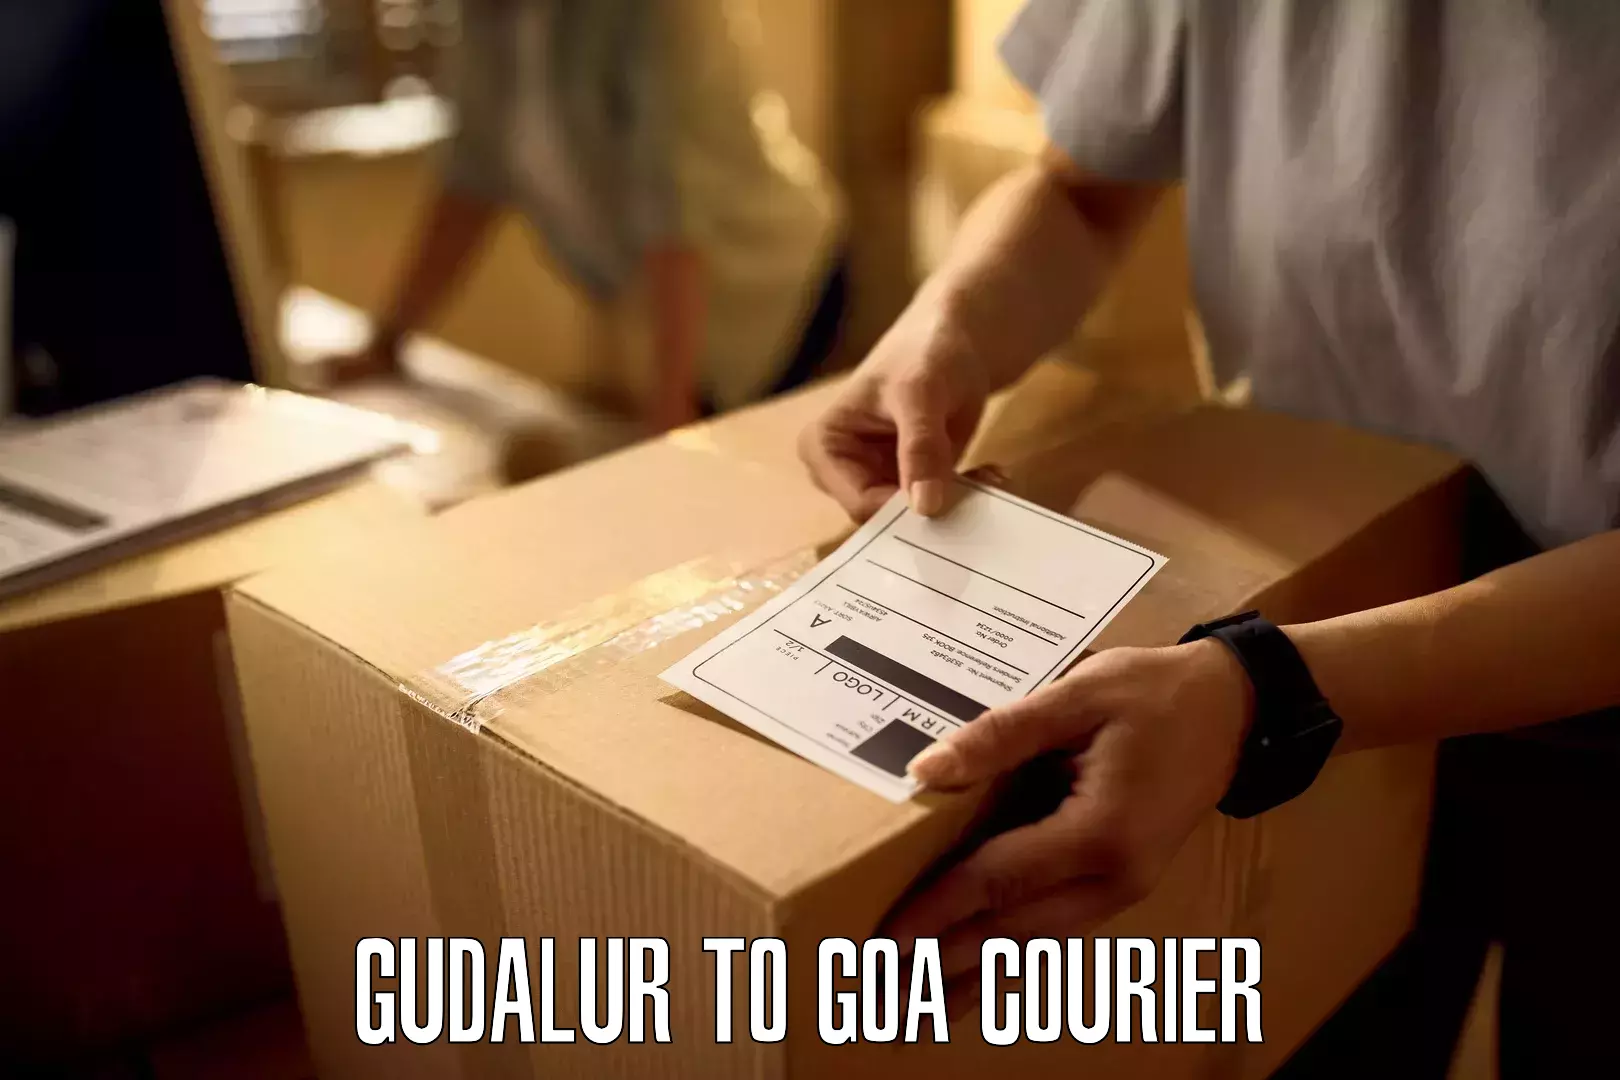 Next-day delivery options Gudalur to Canacona